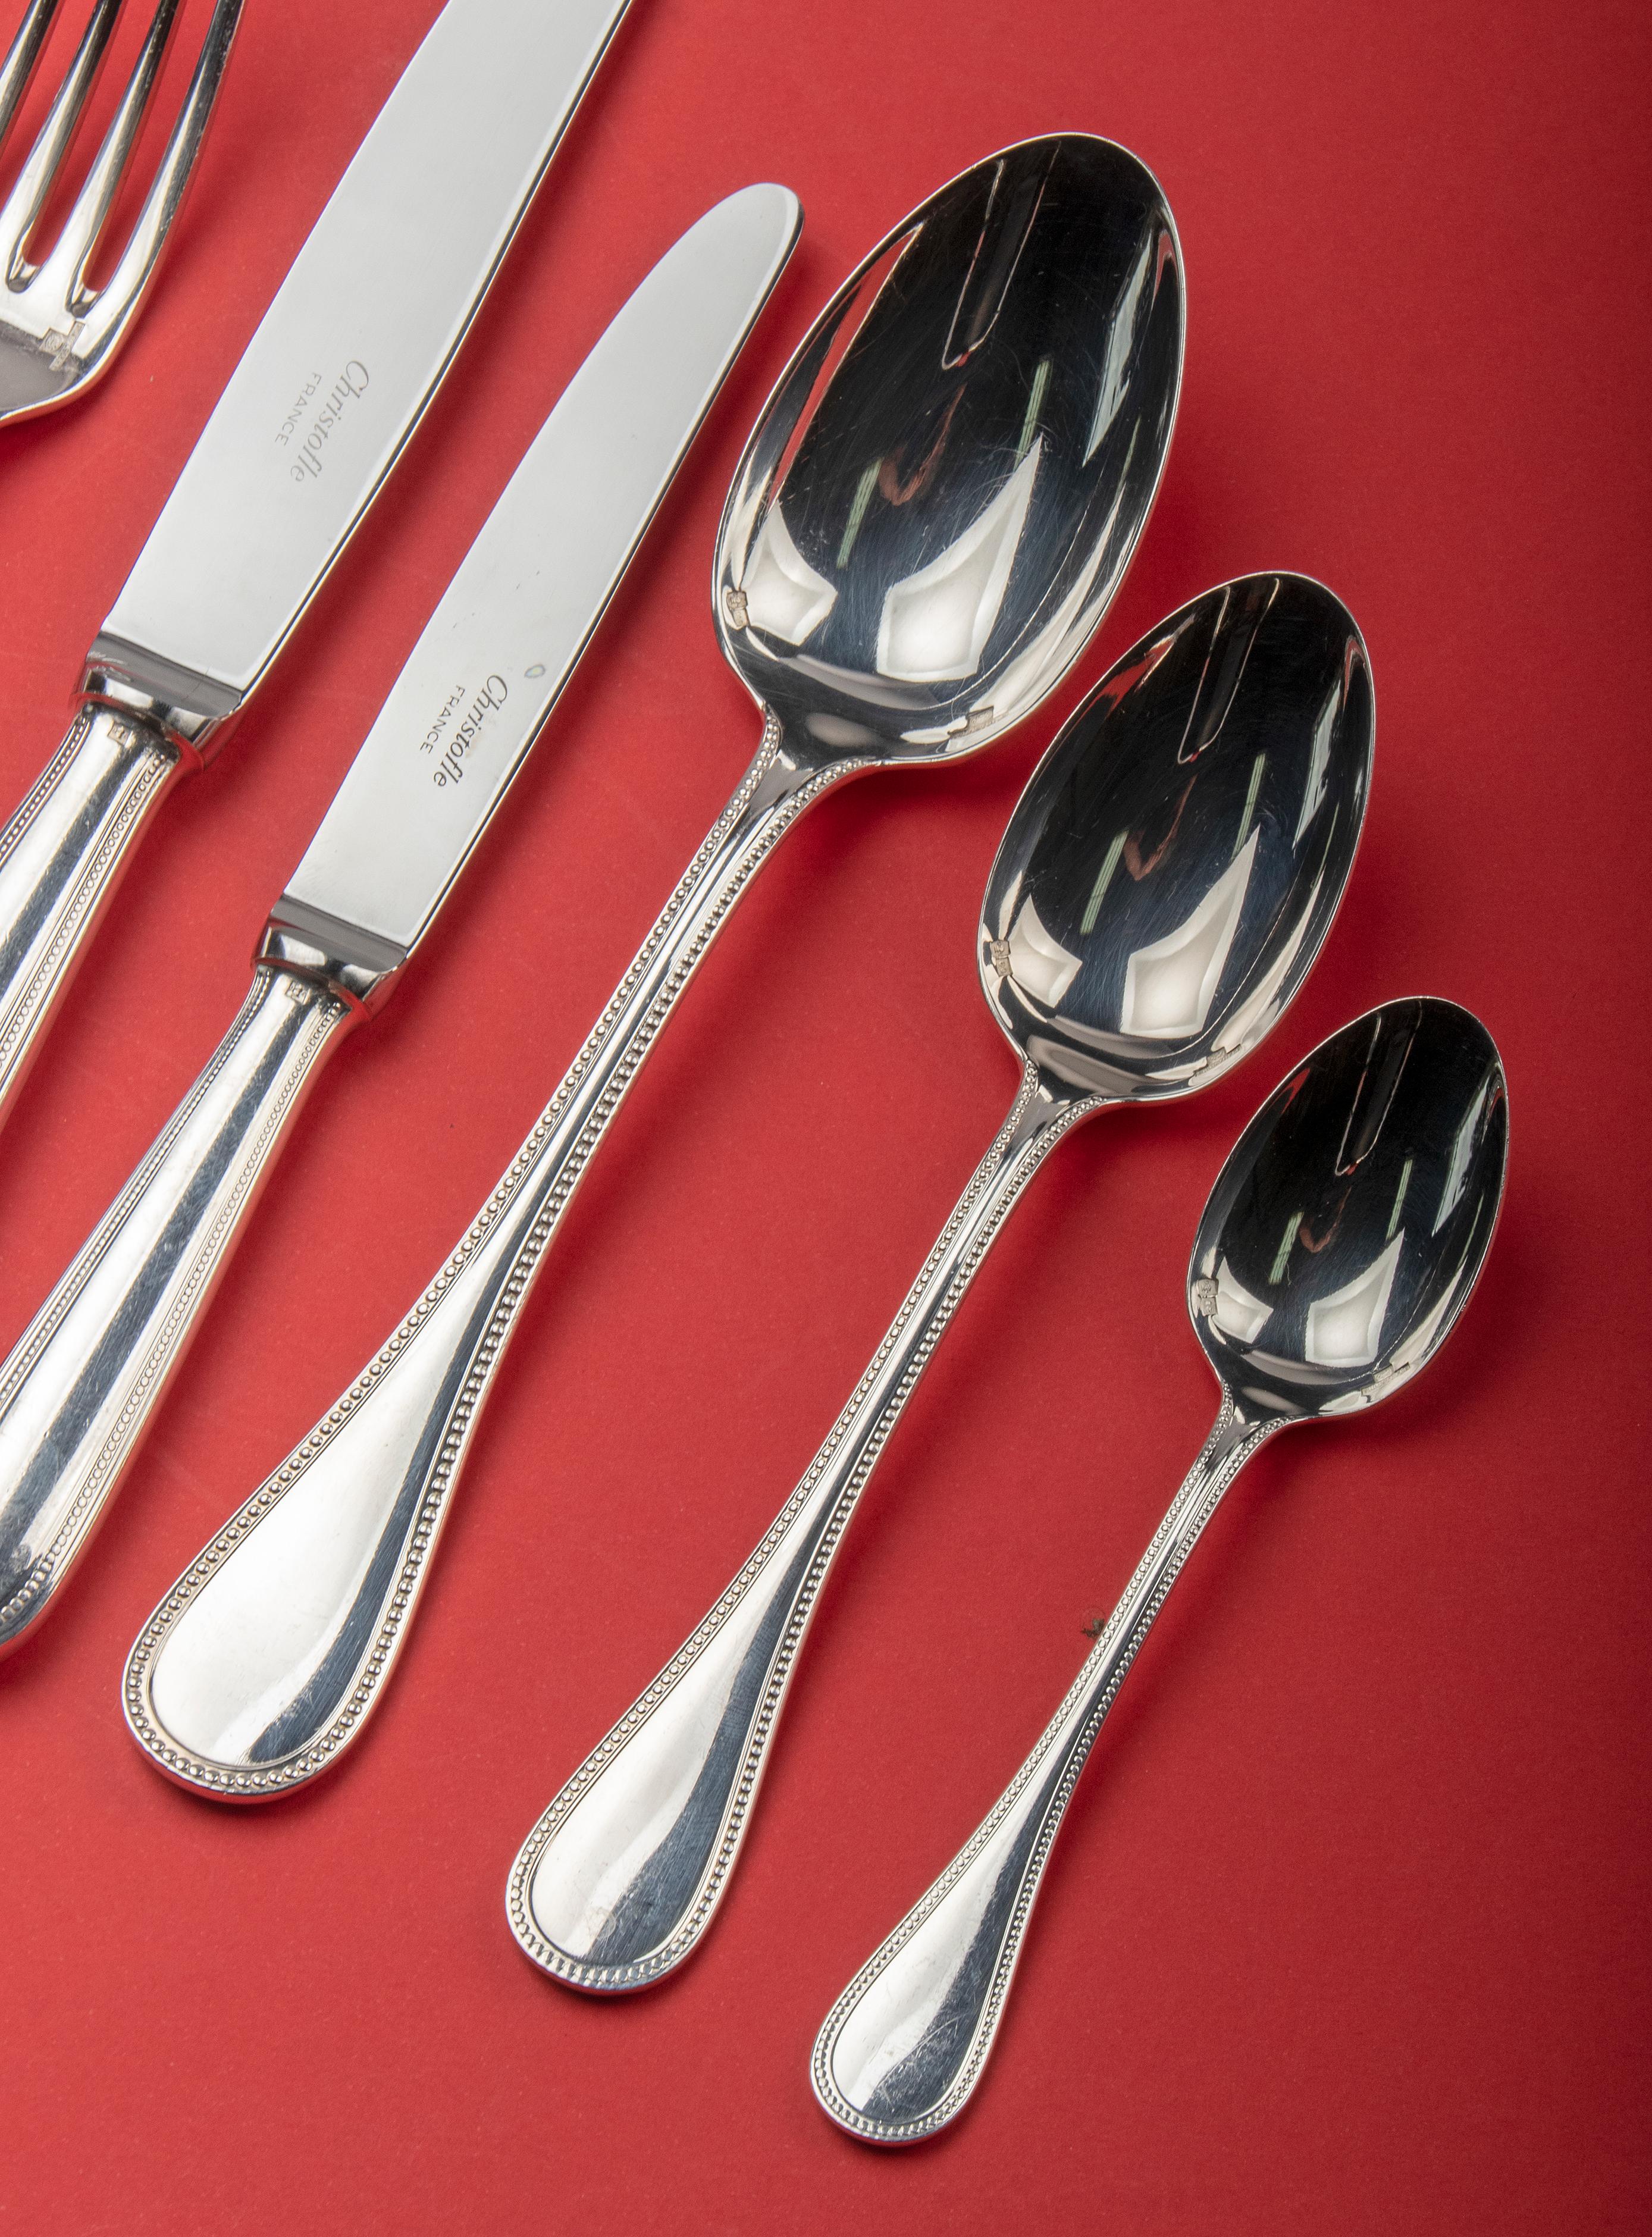 Late 20th Century 105-Piece Set of Silver Plated Flatware by Christofle 'Perles' Original Case